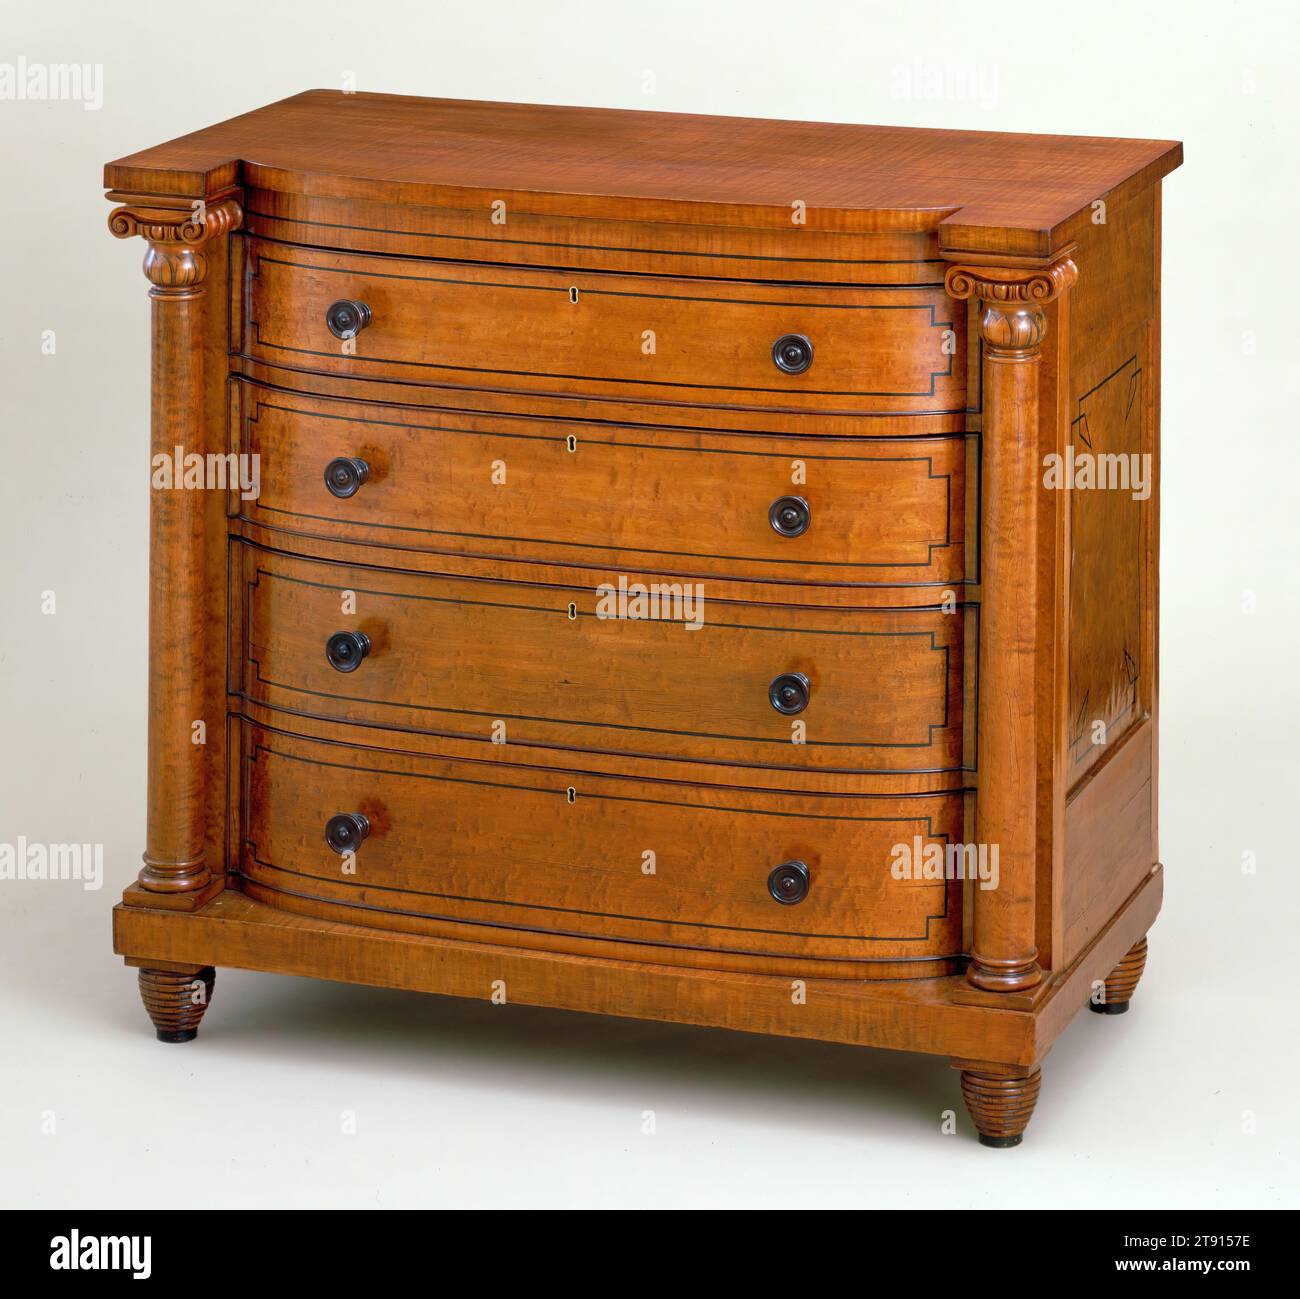 Chest of drawers, c. 1825, 43 1/2 x 47 x 23 1/4 in. (110.49 x 119.38 x 59.06 cm), Bird's eye and tiger maple, pine, tulip, United States, 19th century, Chests of drawers with bowed fronts flanked by caryatid figures or columns, such as this one, are often attributed to the Philadelphia area, where a significant number are known to have been owned and made. The form reflects a strong influence from the French Empire, or Neoclassical style. This example differs from most in that it is made of maple with rosewood details, more commonly found on Biedermeier style furniture made at this time Stock Photo